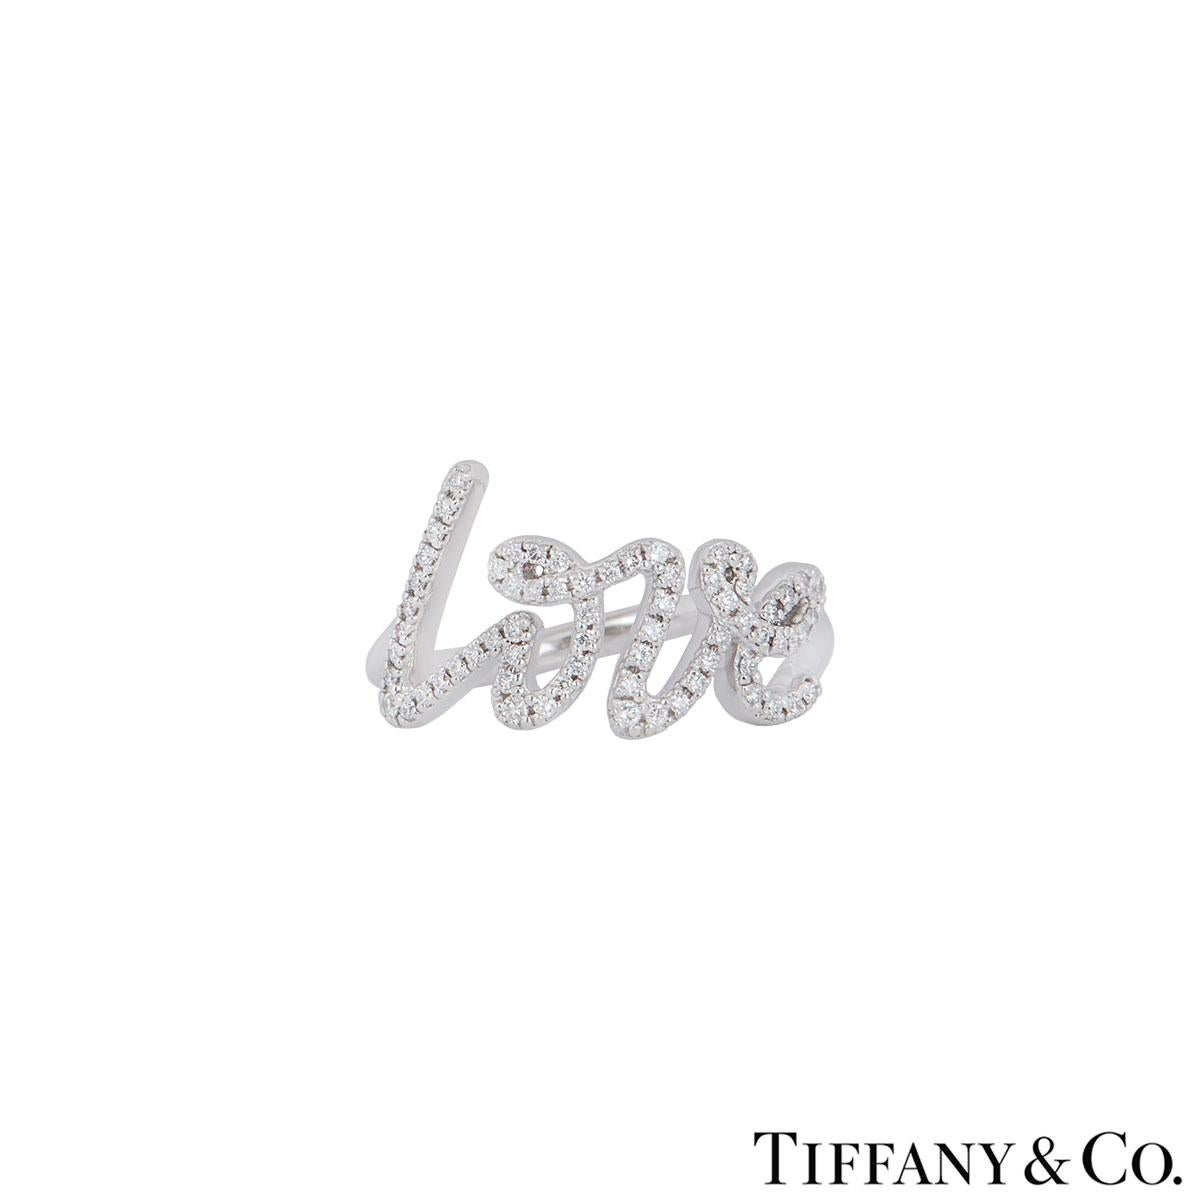 An 18k white gold diamond ring by Tiffany & Co. from the Paloma Picasso collection. The ring features the word love written in Paloma Picasso's own writing as the focal point pave set with round brilliant cut diamonds with a total weight of 0.20ct.